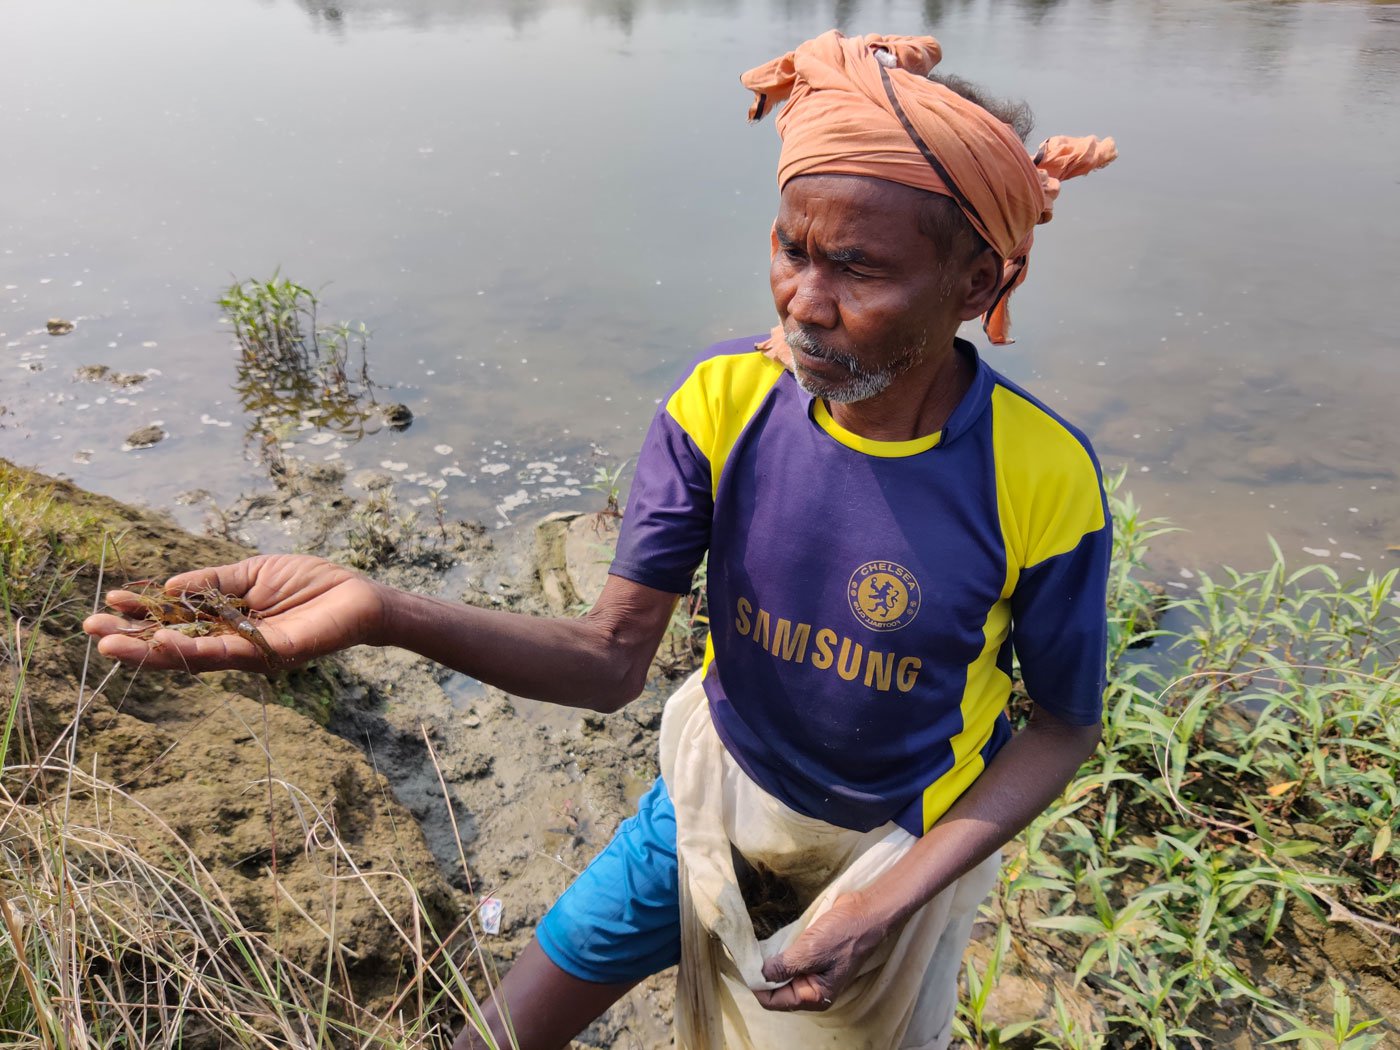 In West Bengal’s Puruliya district, Anirudhdha Singh Patar, who loves catching prawns and fish with his bare hands, tells PARI about how the Kangsabati river is changing and why he migrates for work